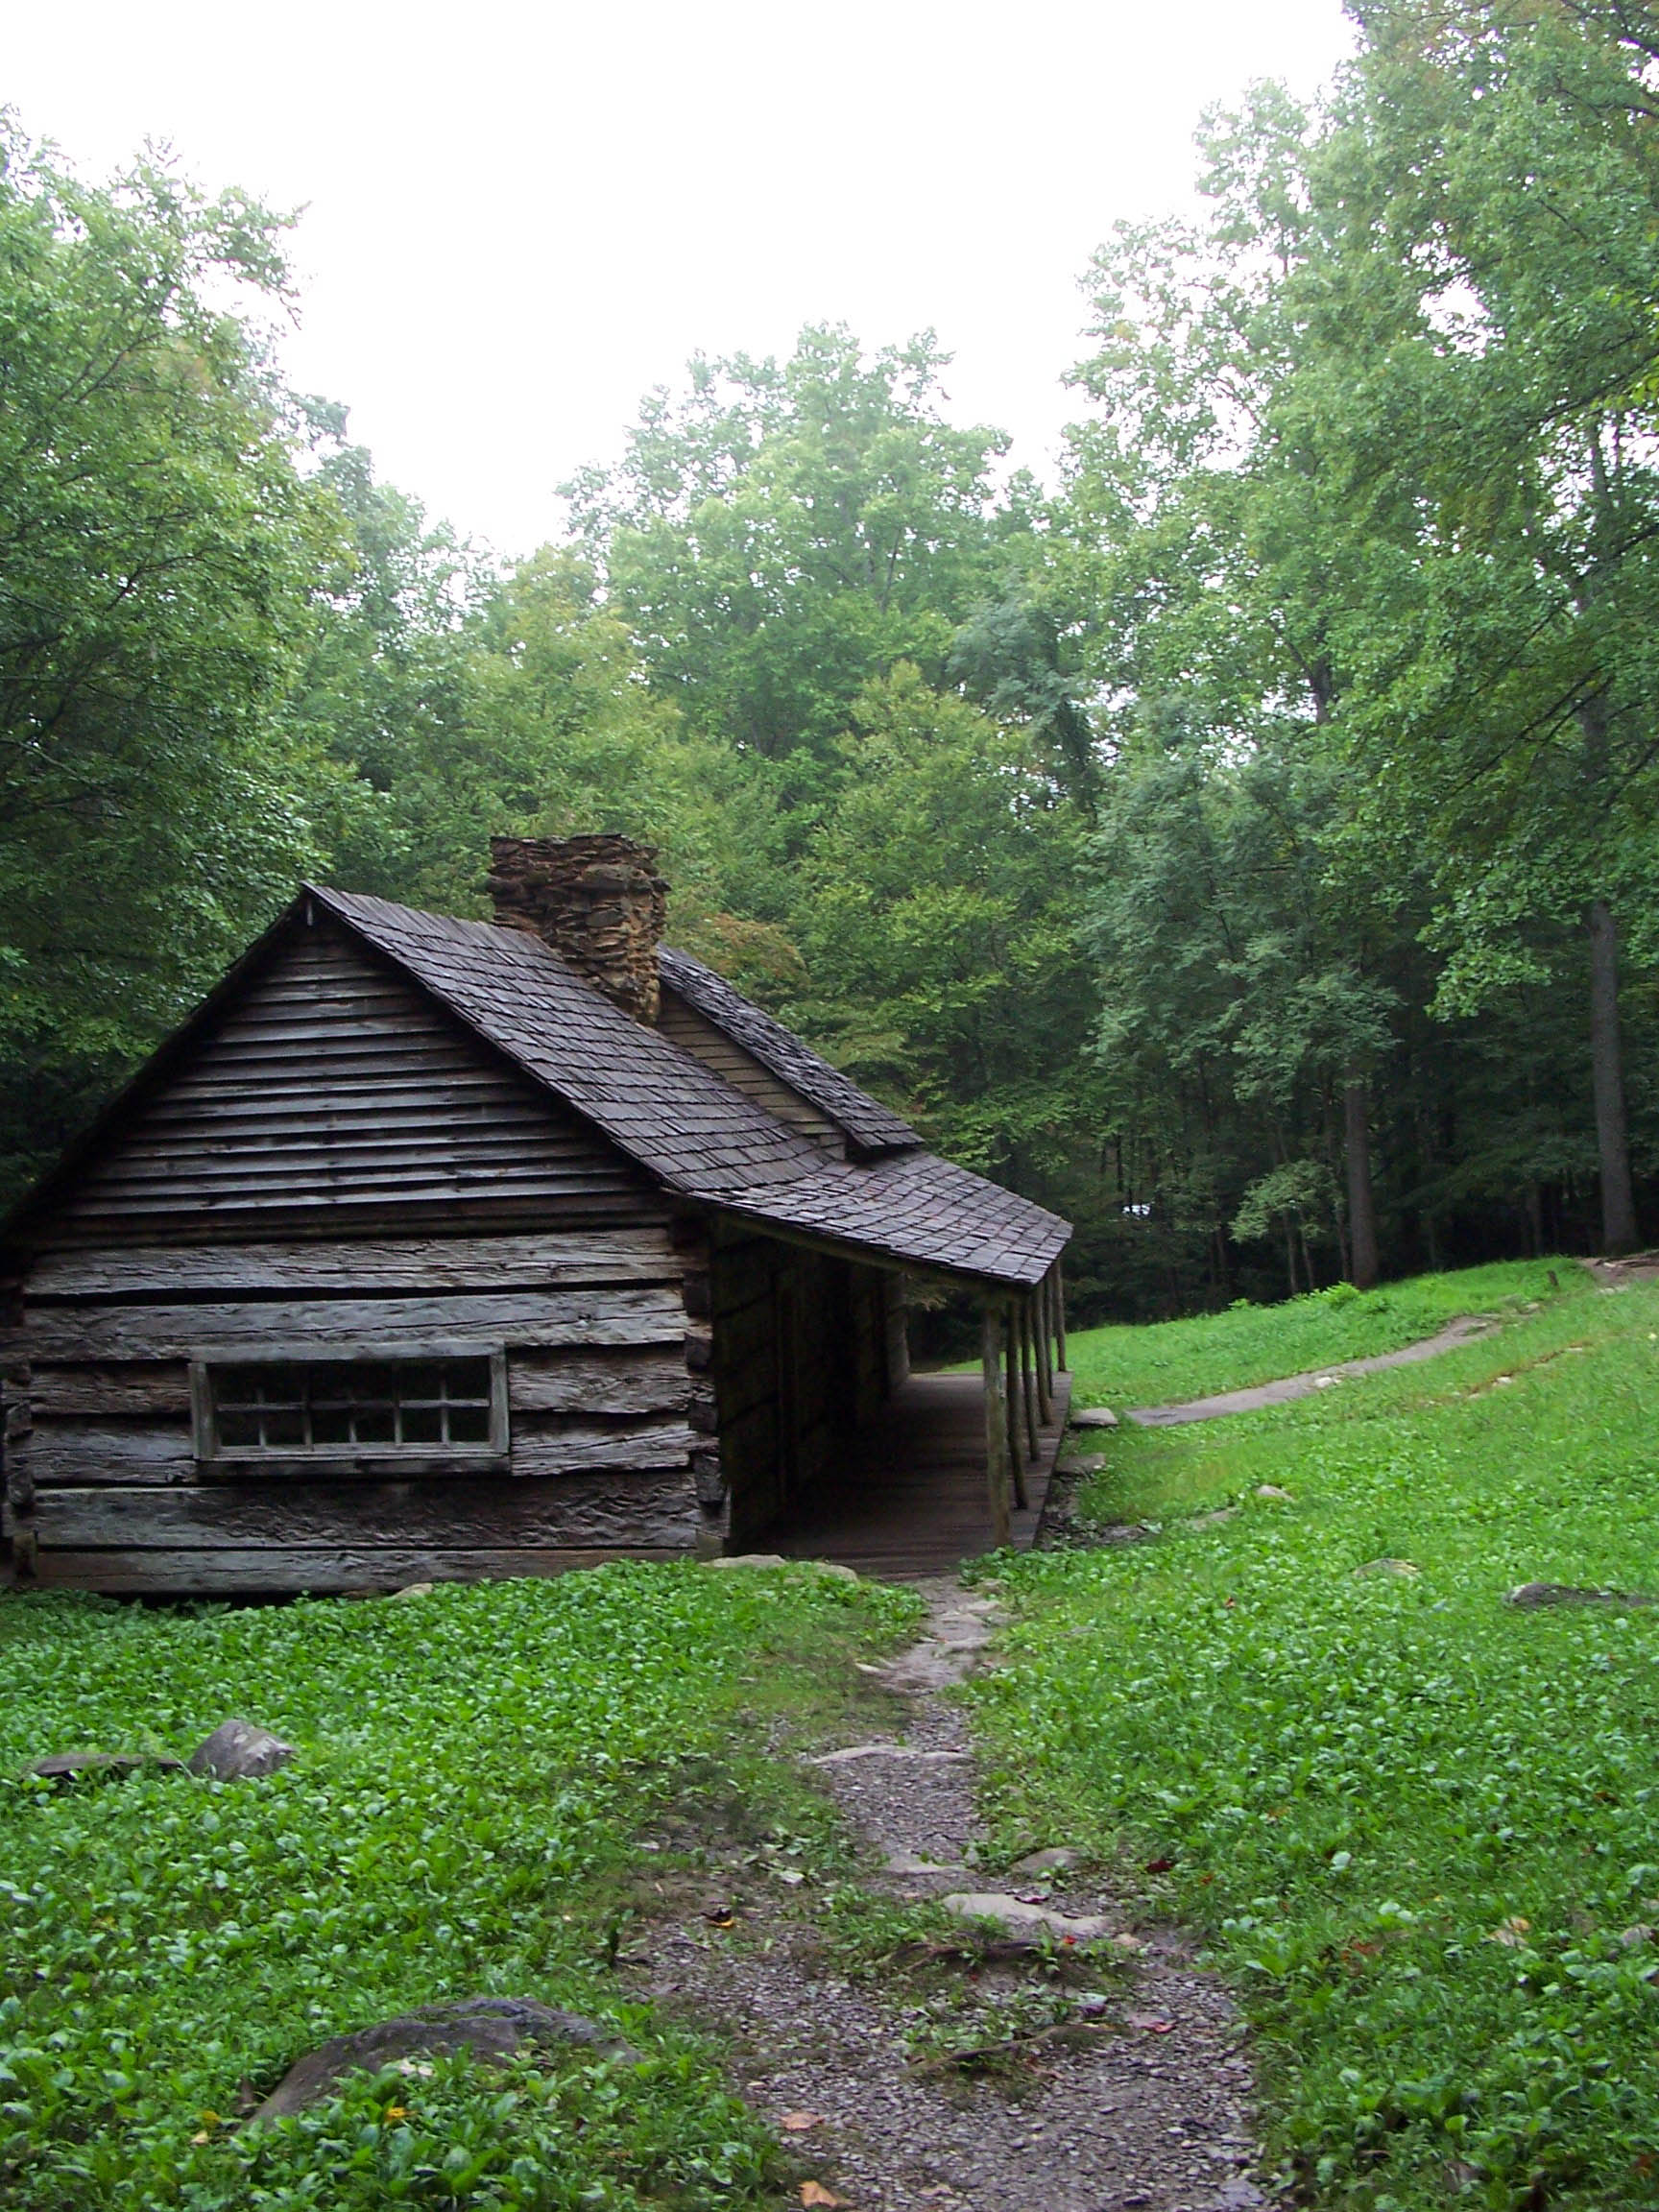 Trail & cabin in the Smokies